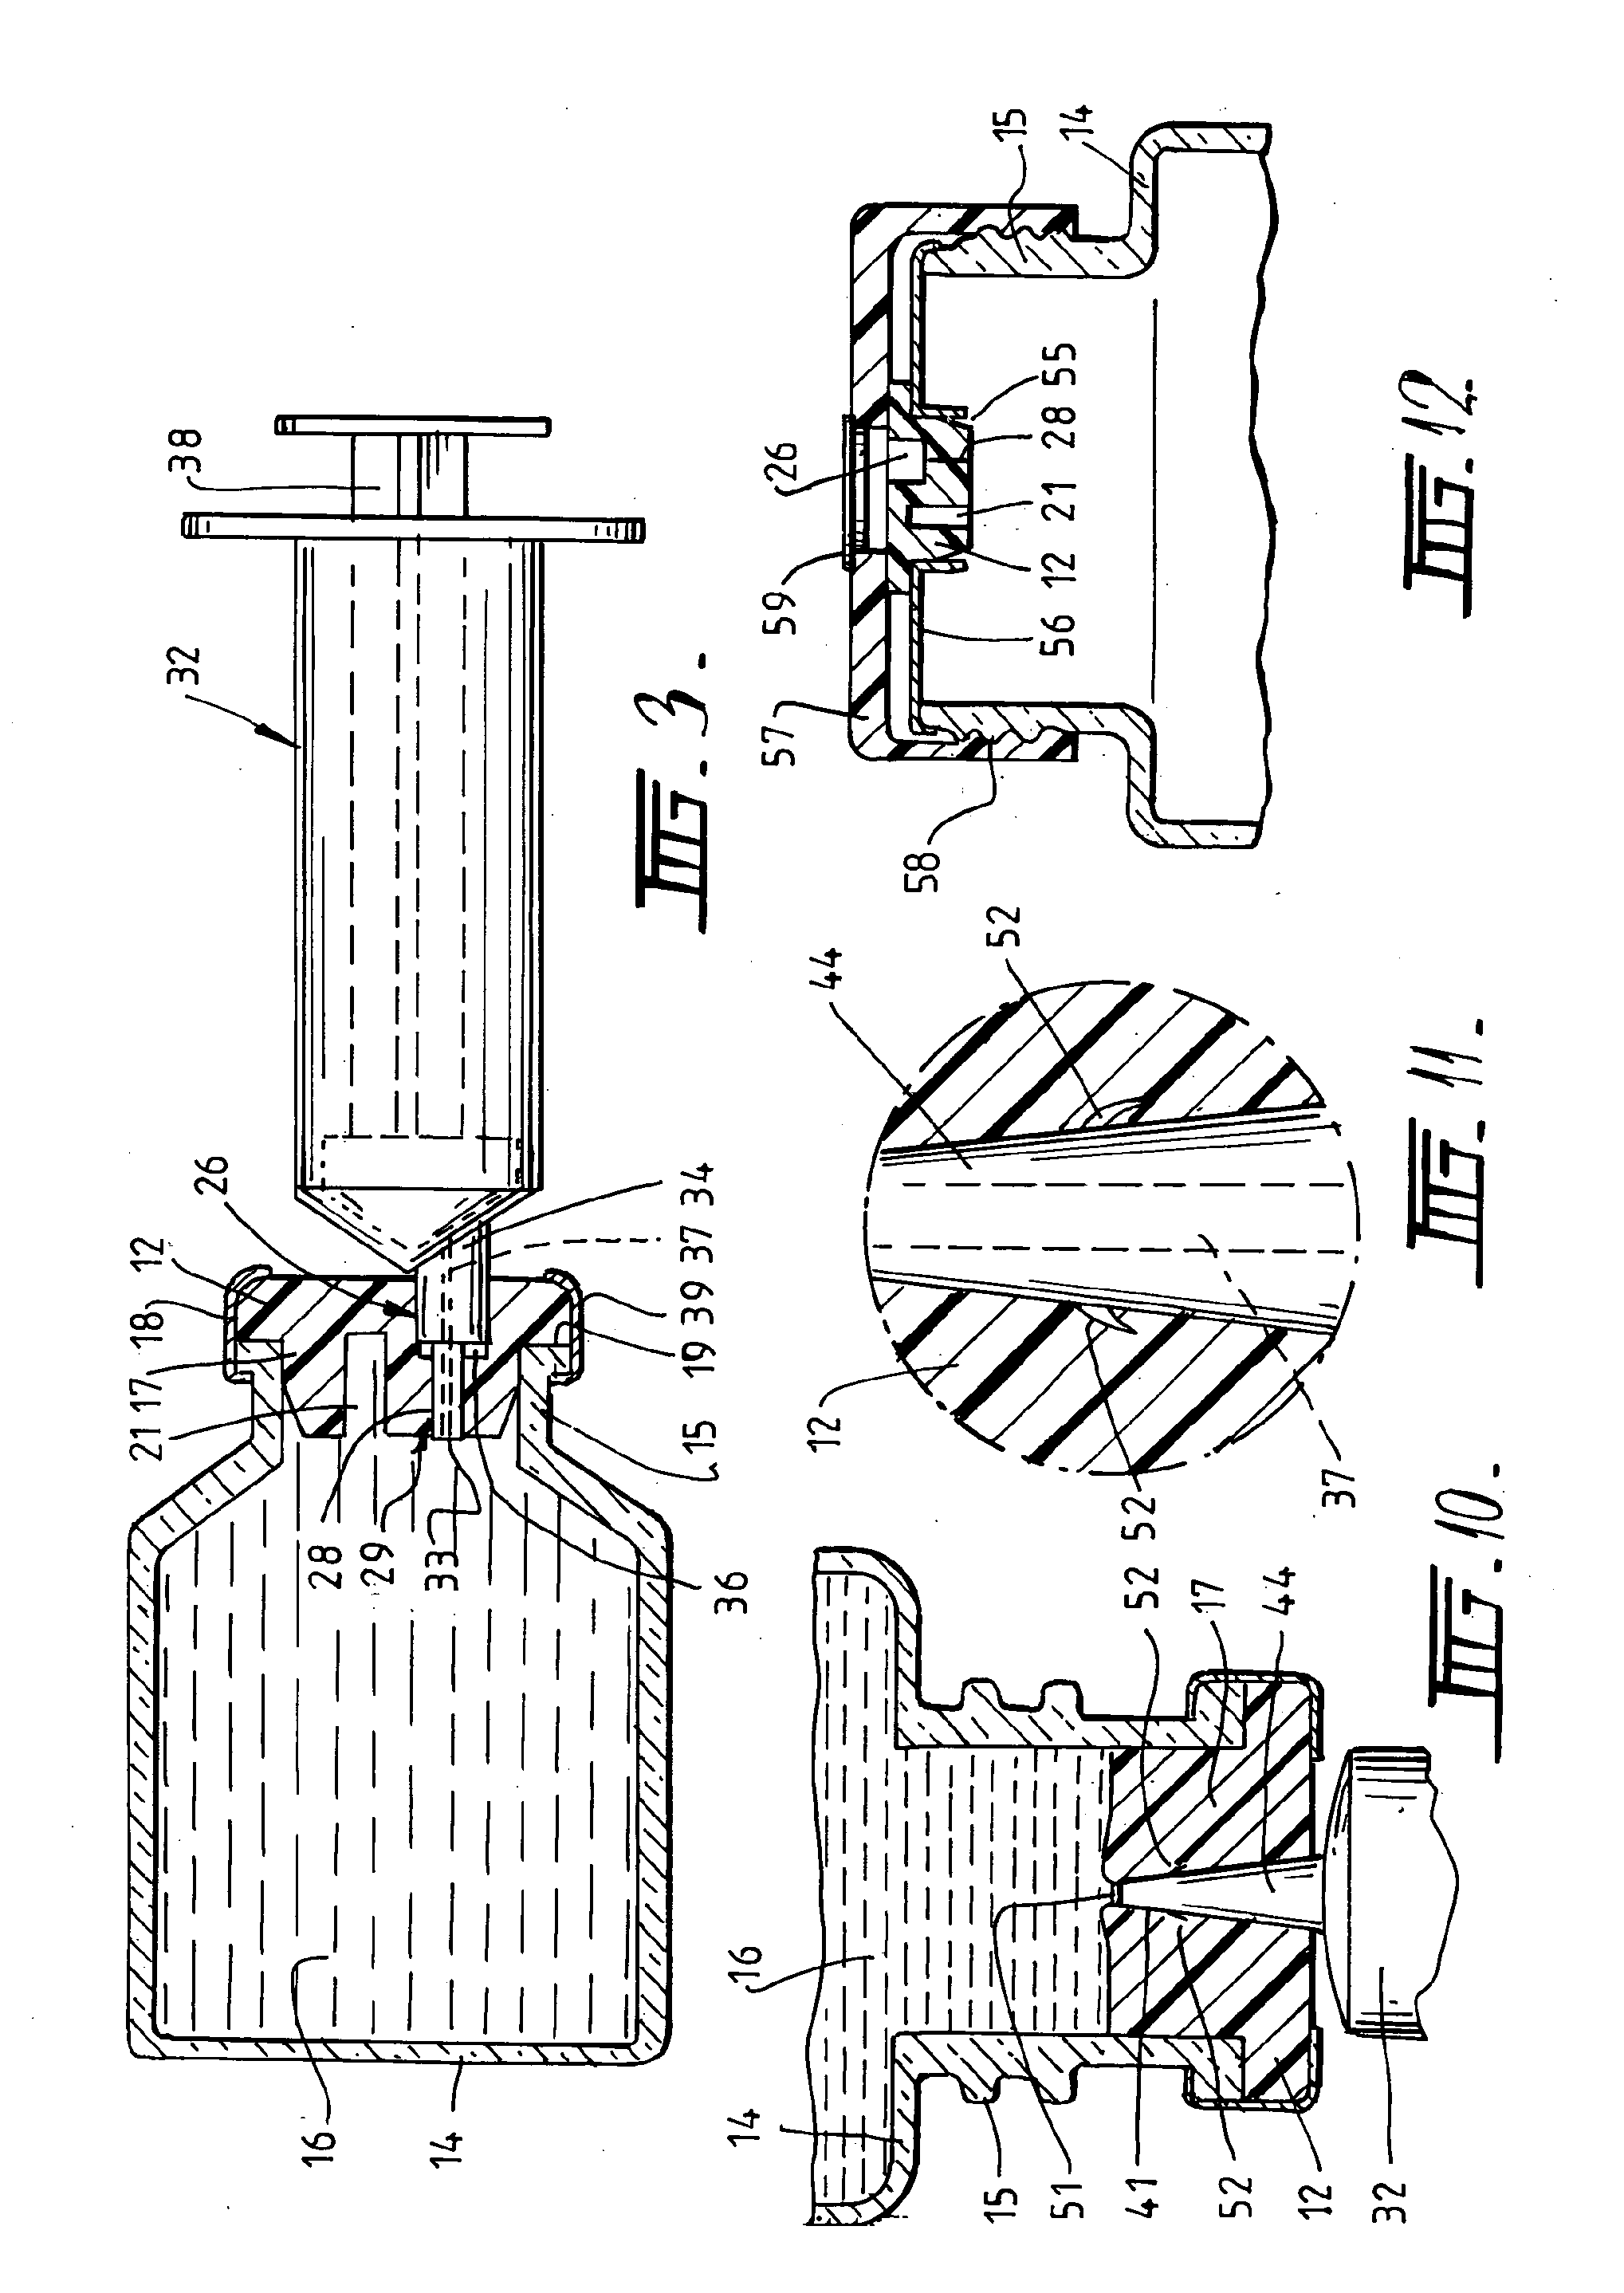 Closure and dispensing system